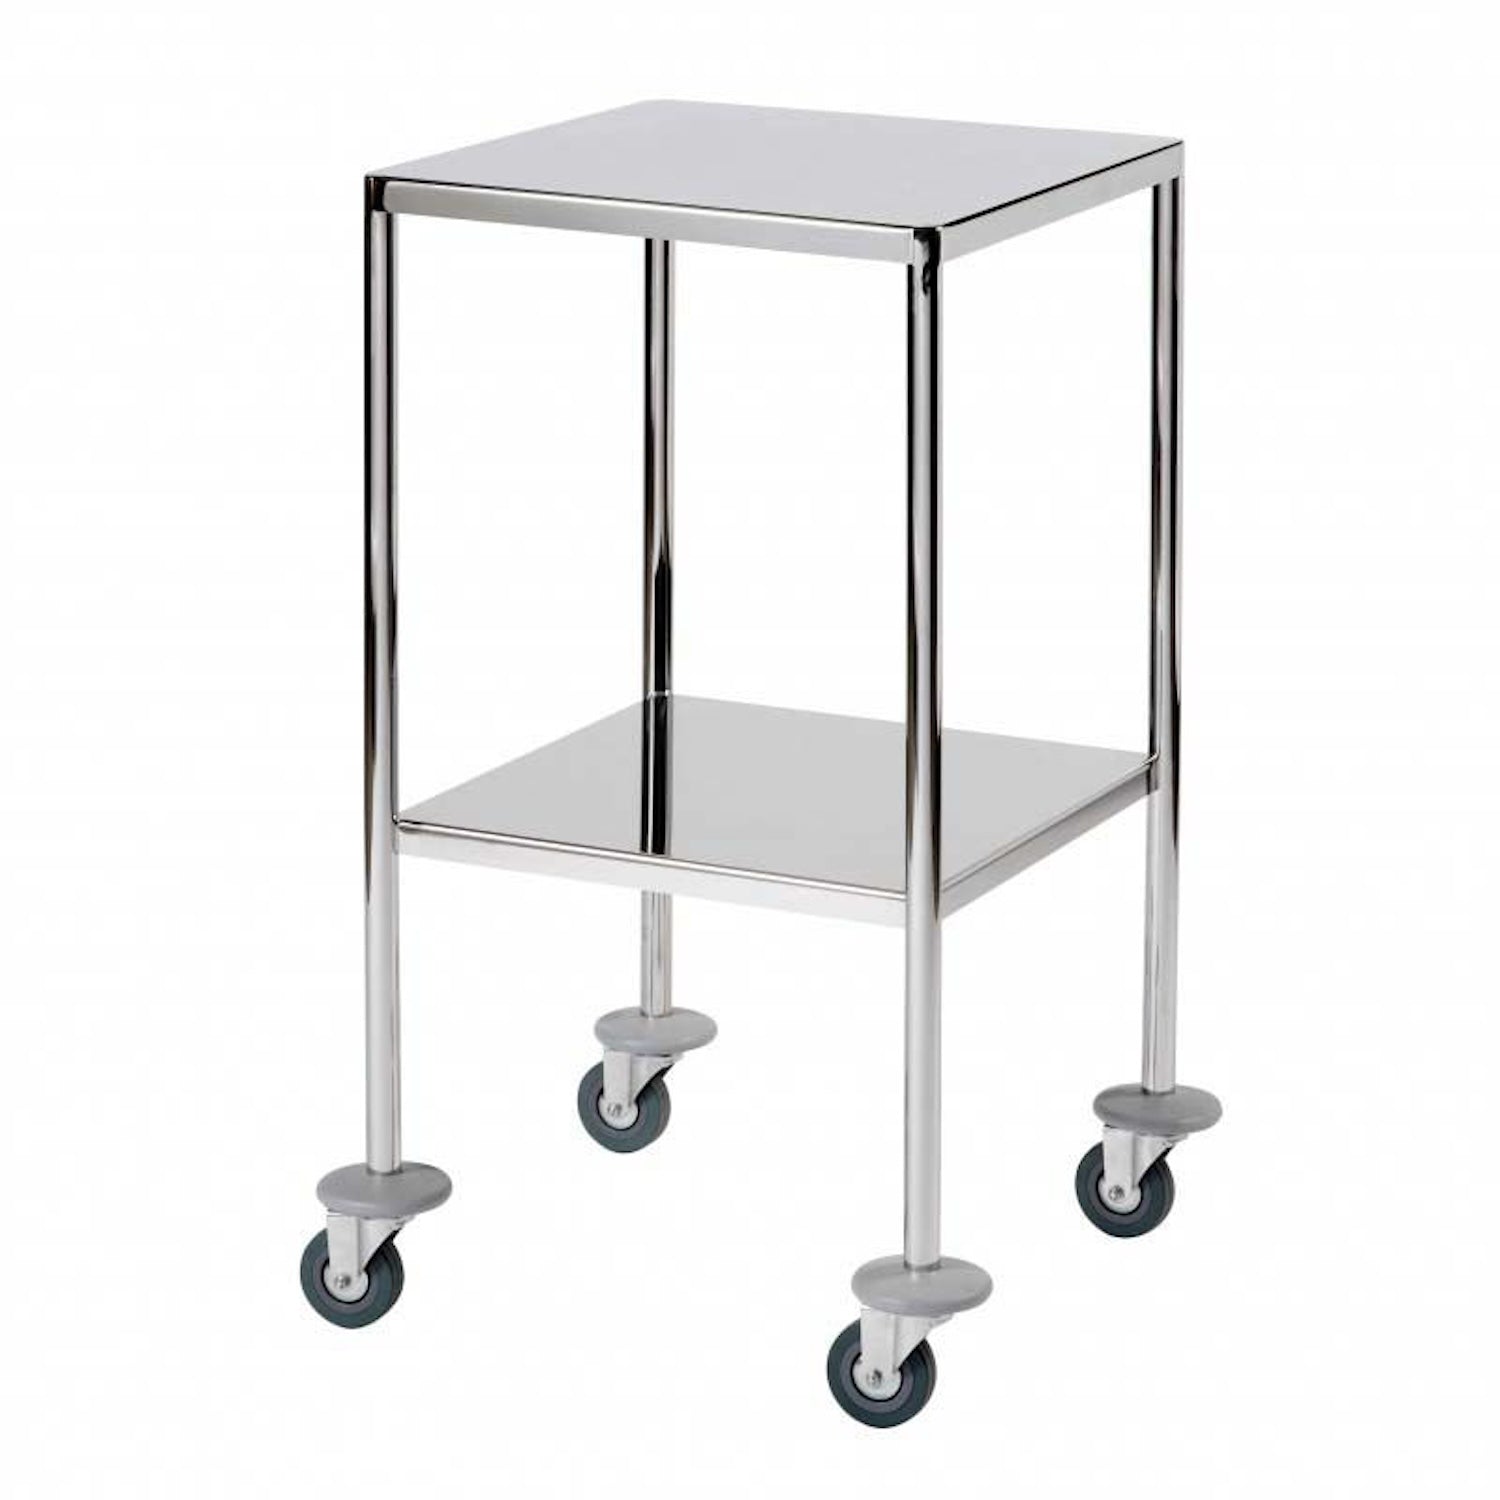 Small 45cm Wide Mirror Polished Stainless Steel Surgical Trolley - 2 Fully Welded Fixed Shelves (Flange Down)